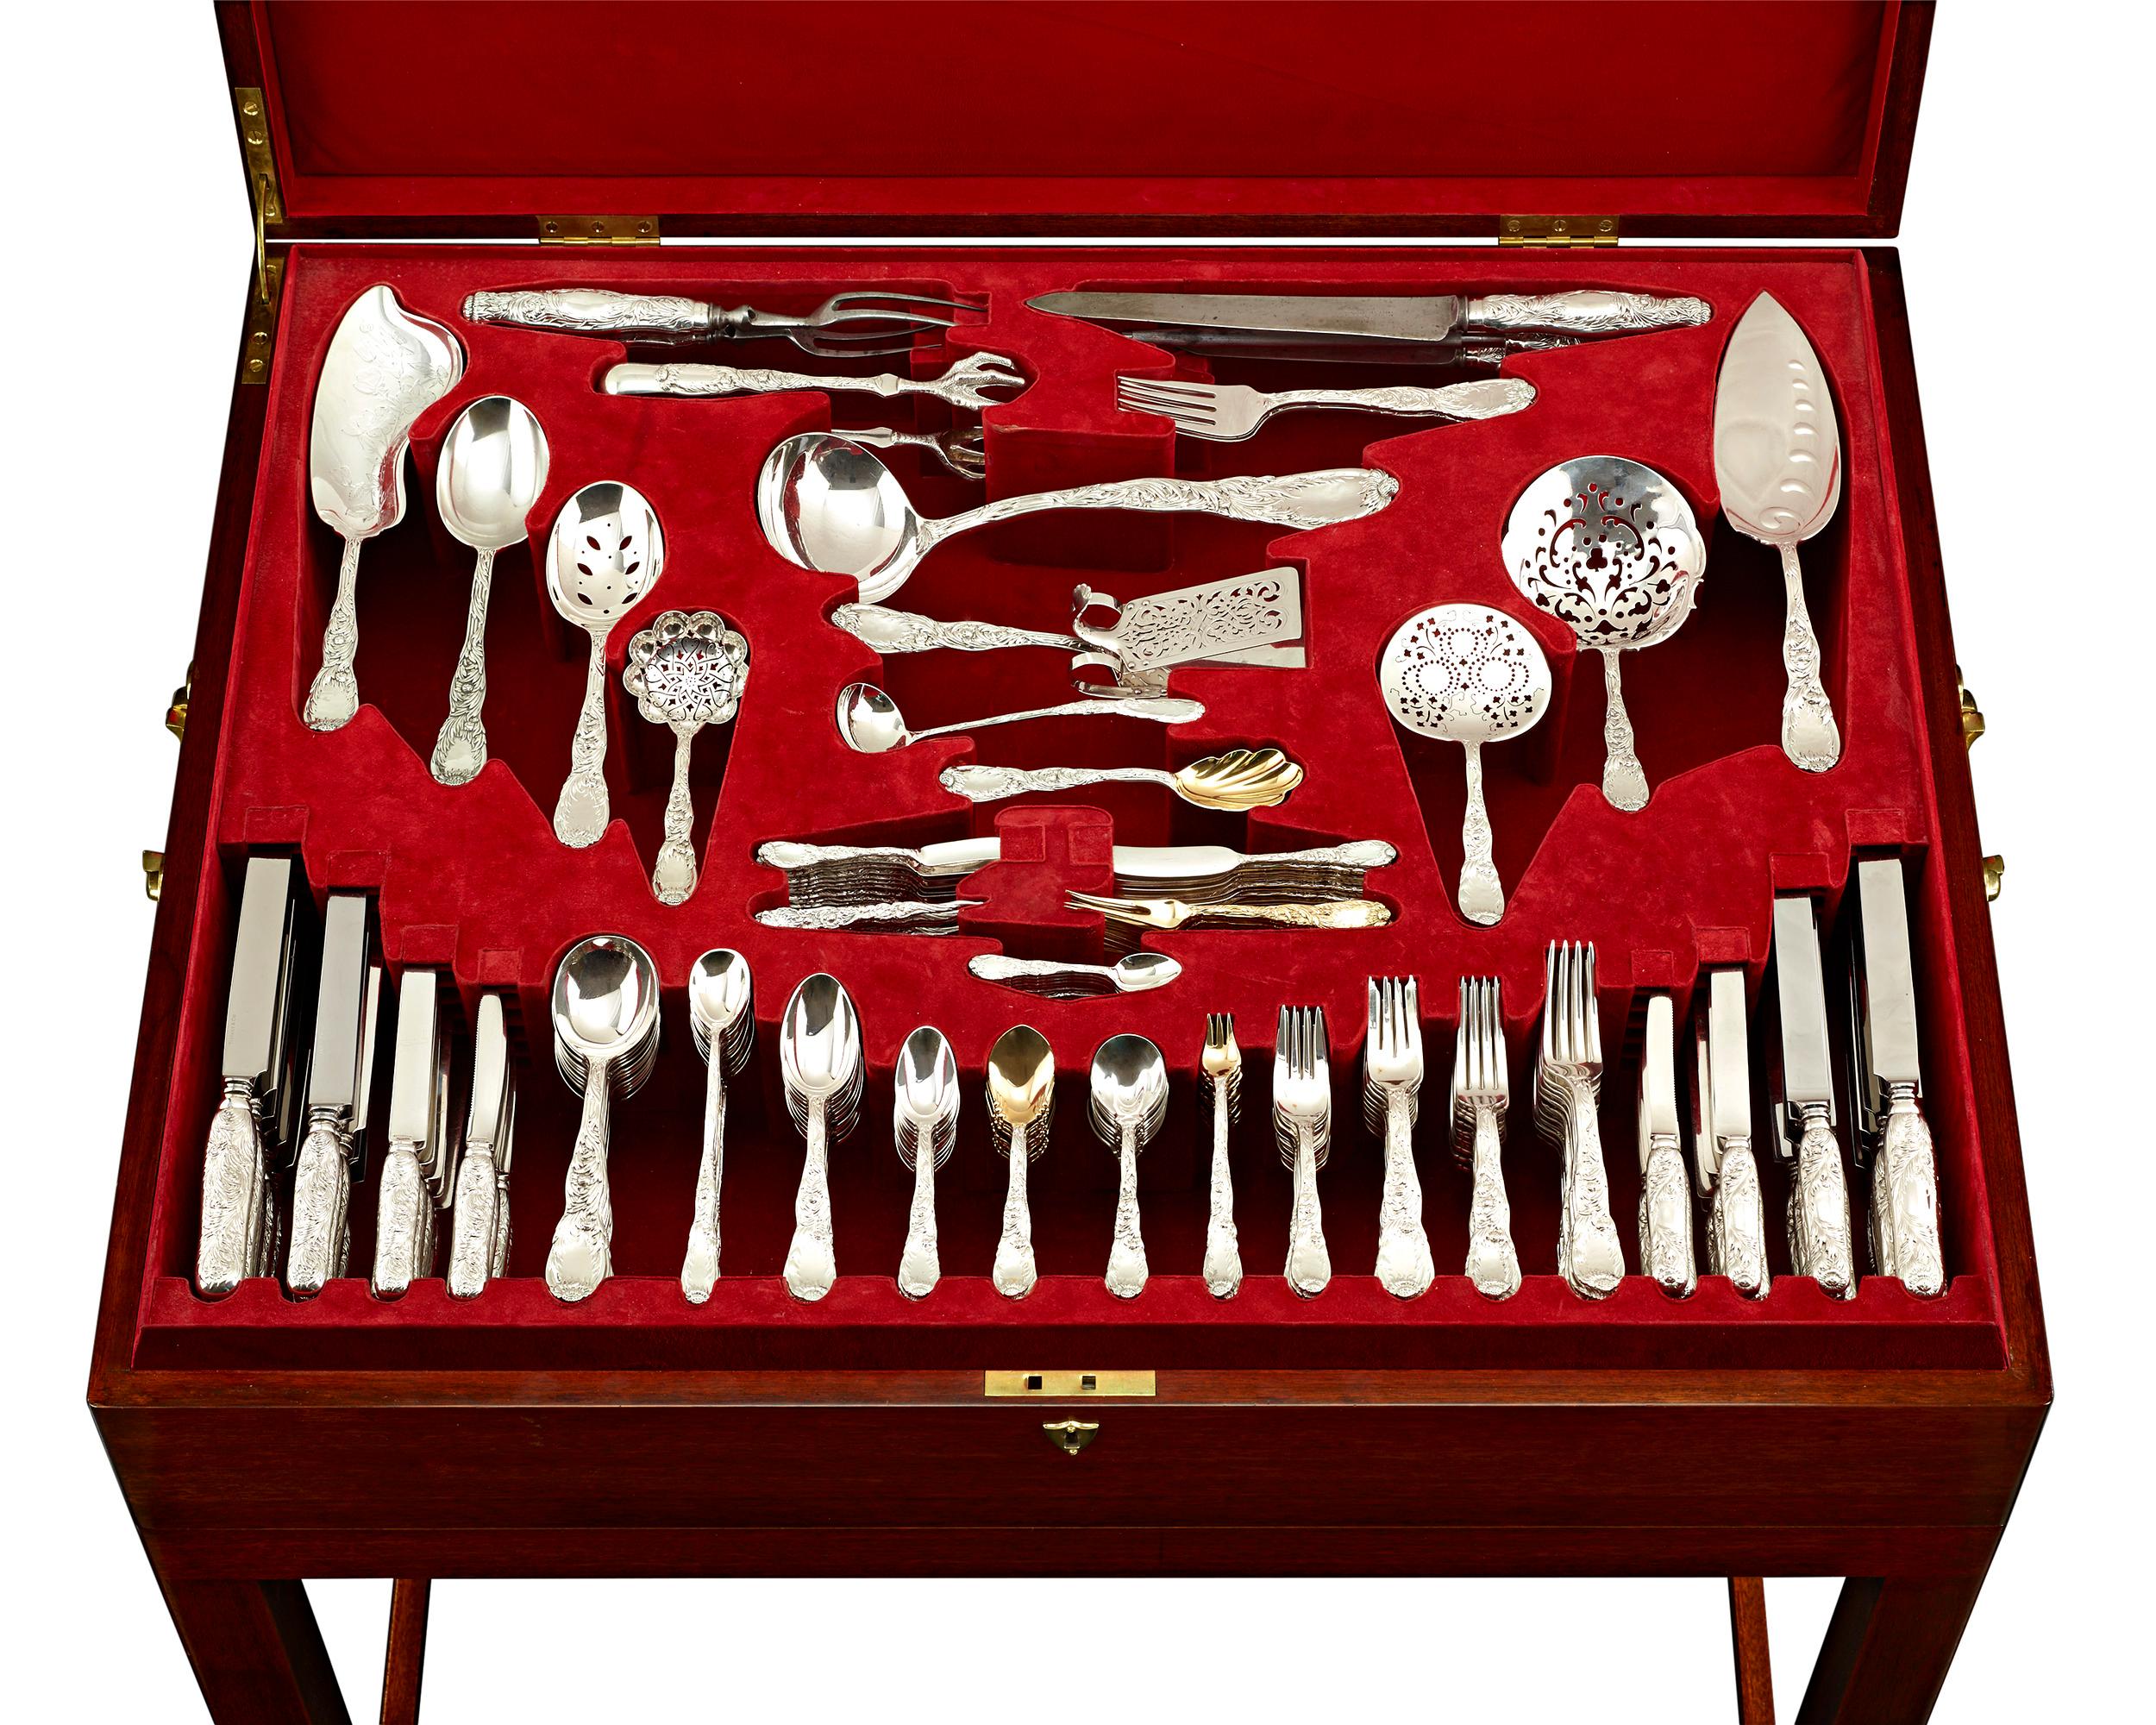 This exceptional 247-piece Tiffany & Co. sterling silver flatware service for 12 is crafted in the highly desirable Chrysanthemum pattern. Introduced in 1878, the Chrysanthemum pattern is considered among Tiffany's most luxurious designs,